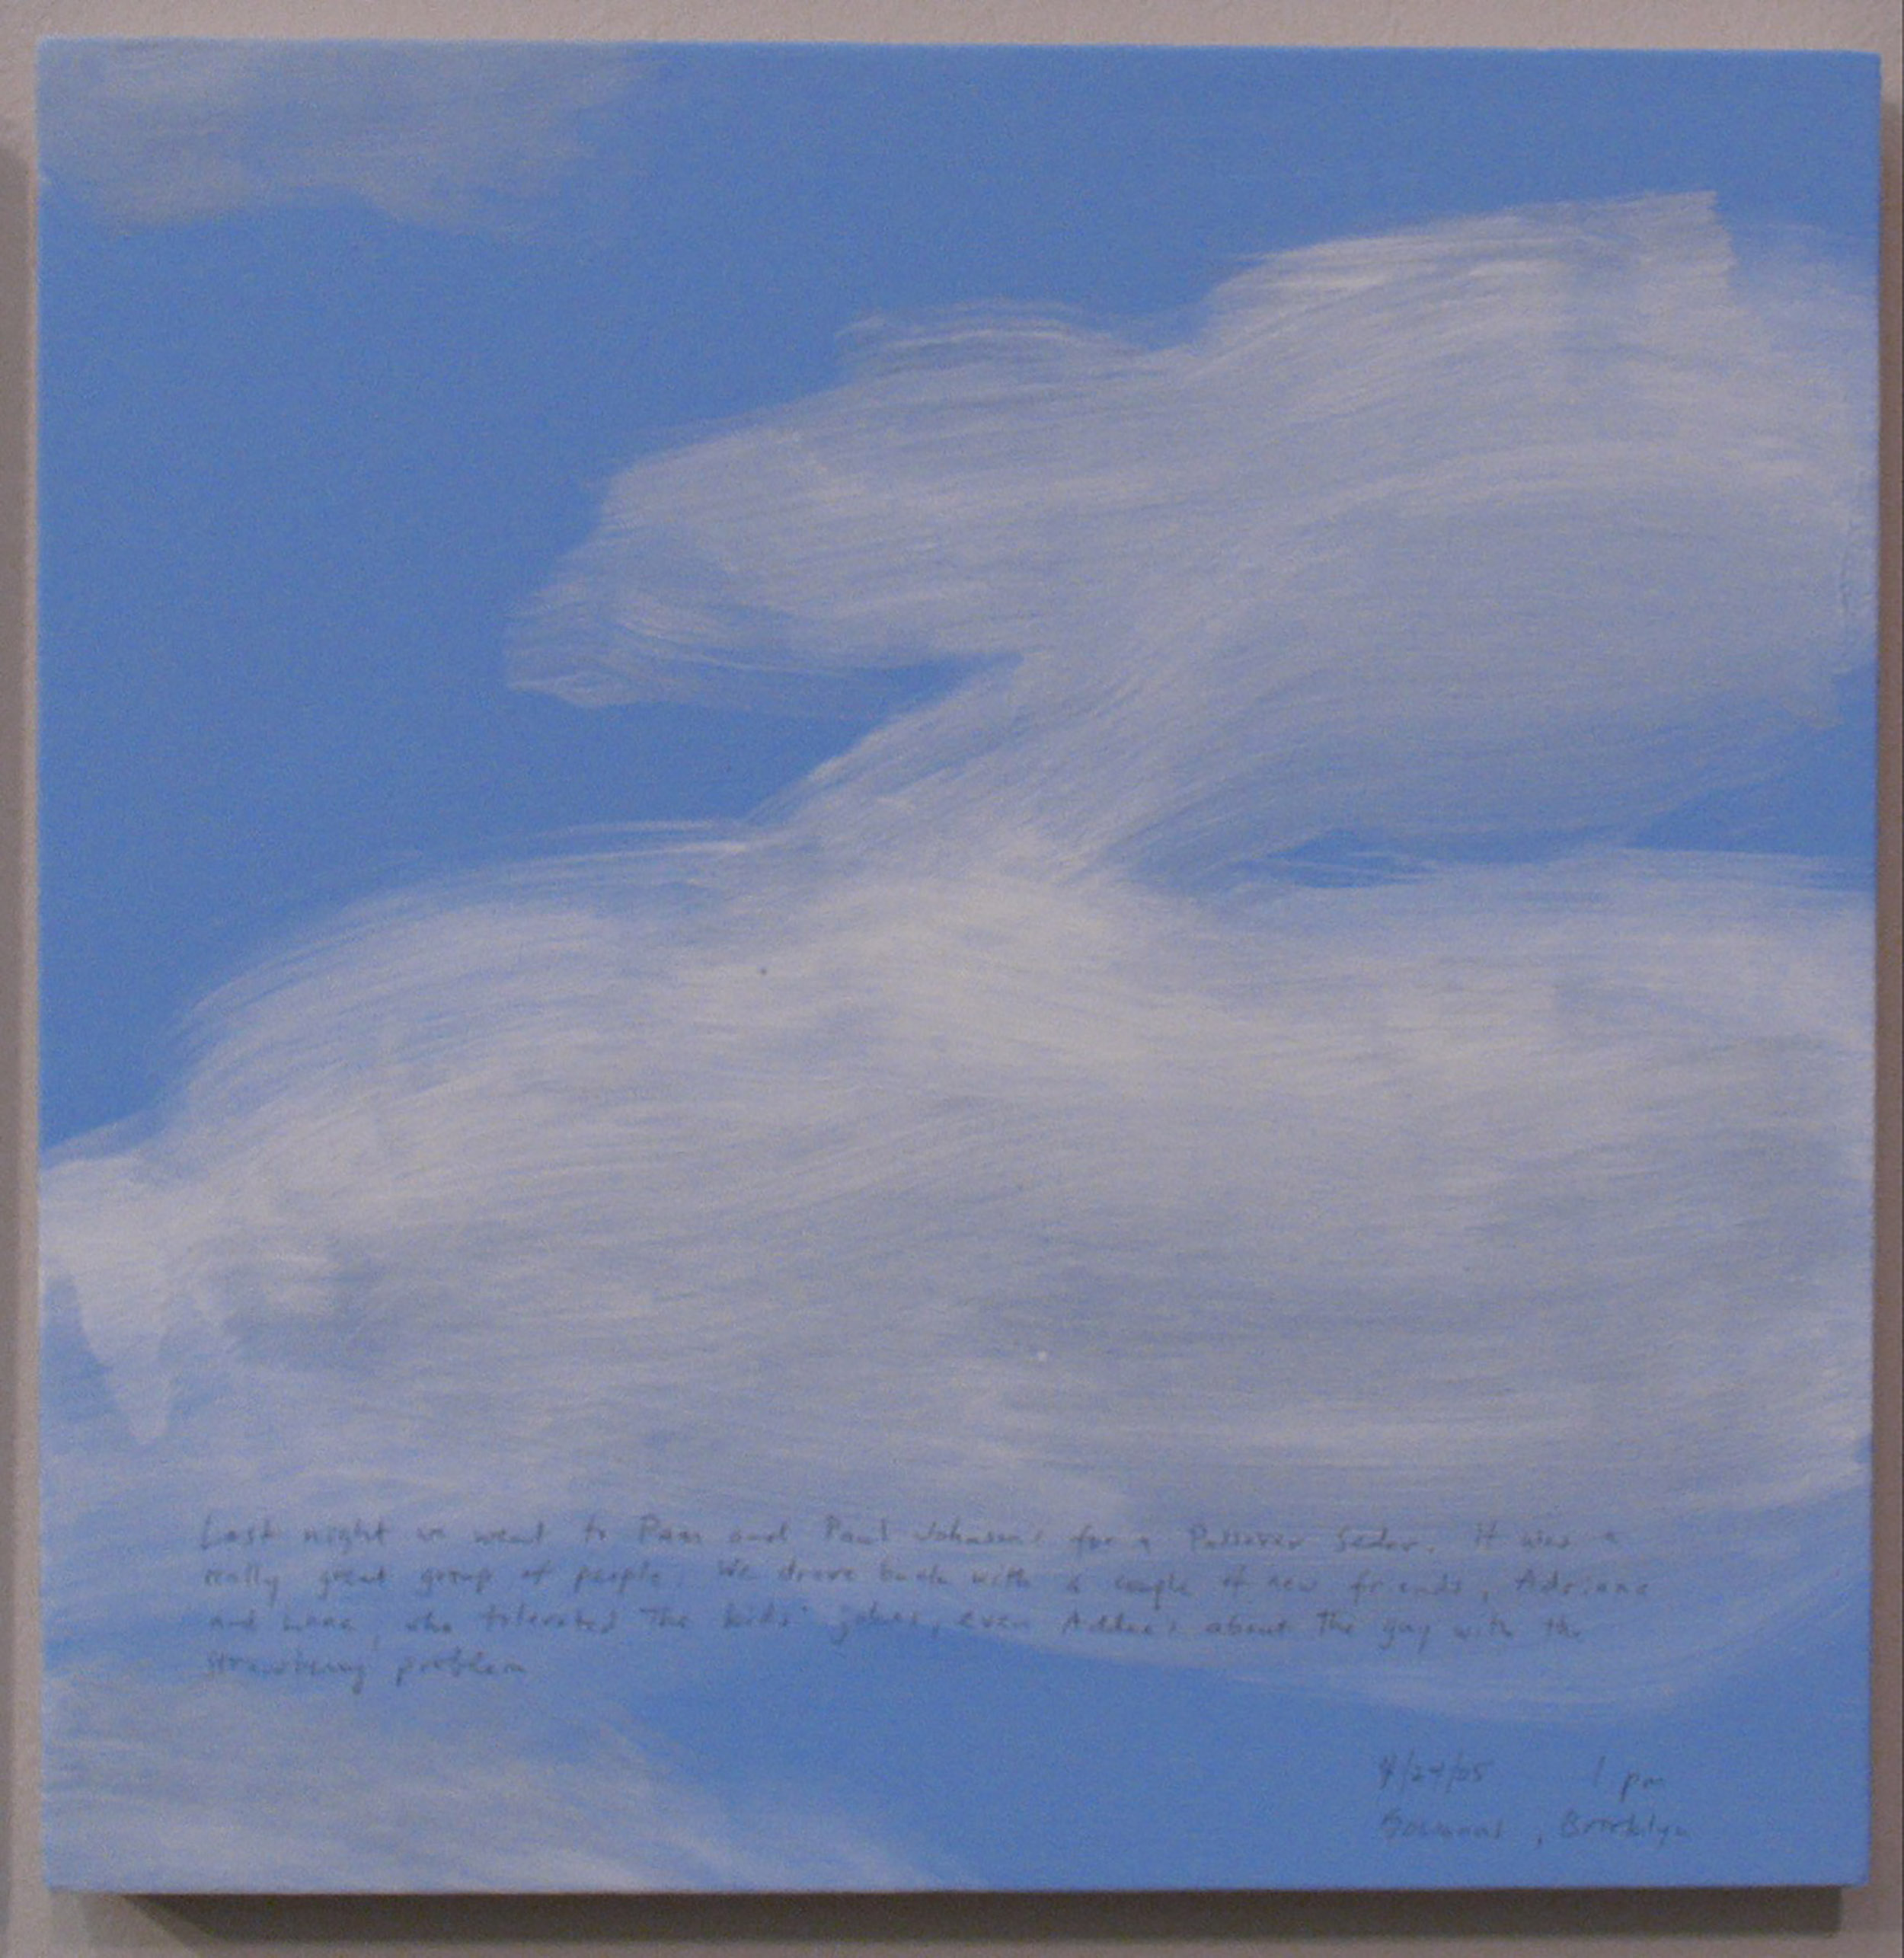 A 14 × 14 inch, acrylic painting of the sky. A journal entry is handwritten on the painting:

“Last night we went to Pam and Paul Johnson’s for a Passover Seder. It was a really great group of people. We drove back with a couple of new friends, Adriane and Lane, who tolerated the kids’ jokes, even Addee’s about the guy with the strawberry problem. 

4/24/05 1 pm
Gowanus, Brooklyn”